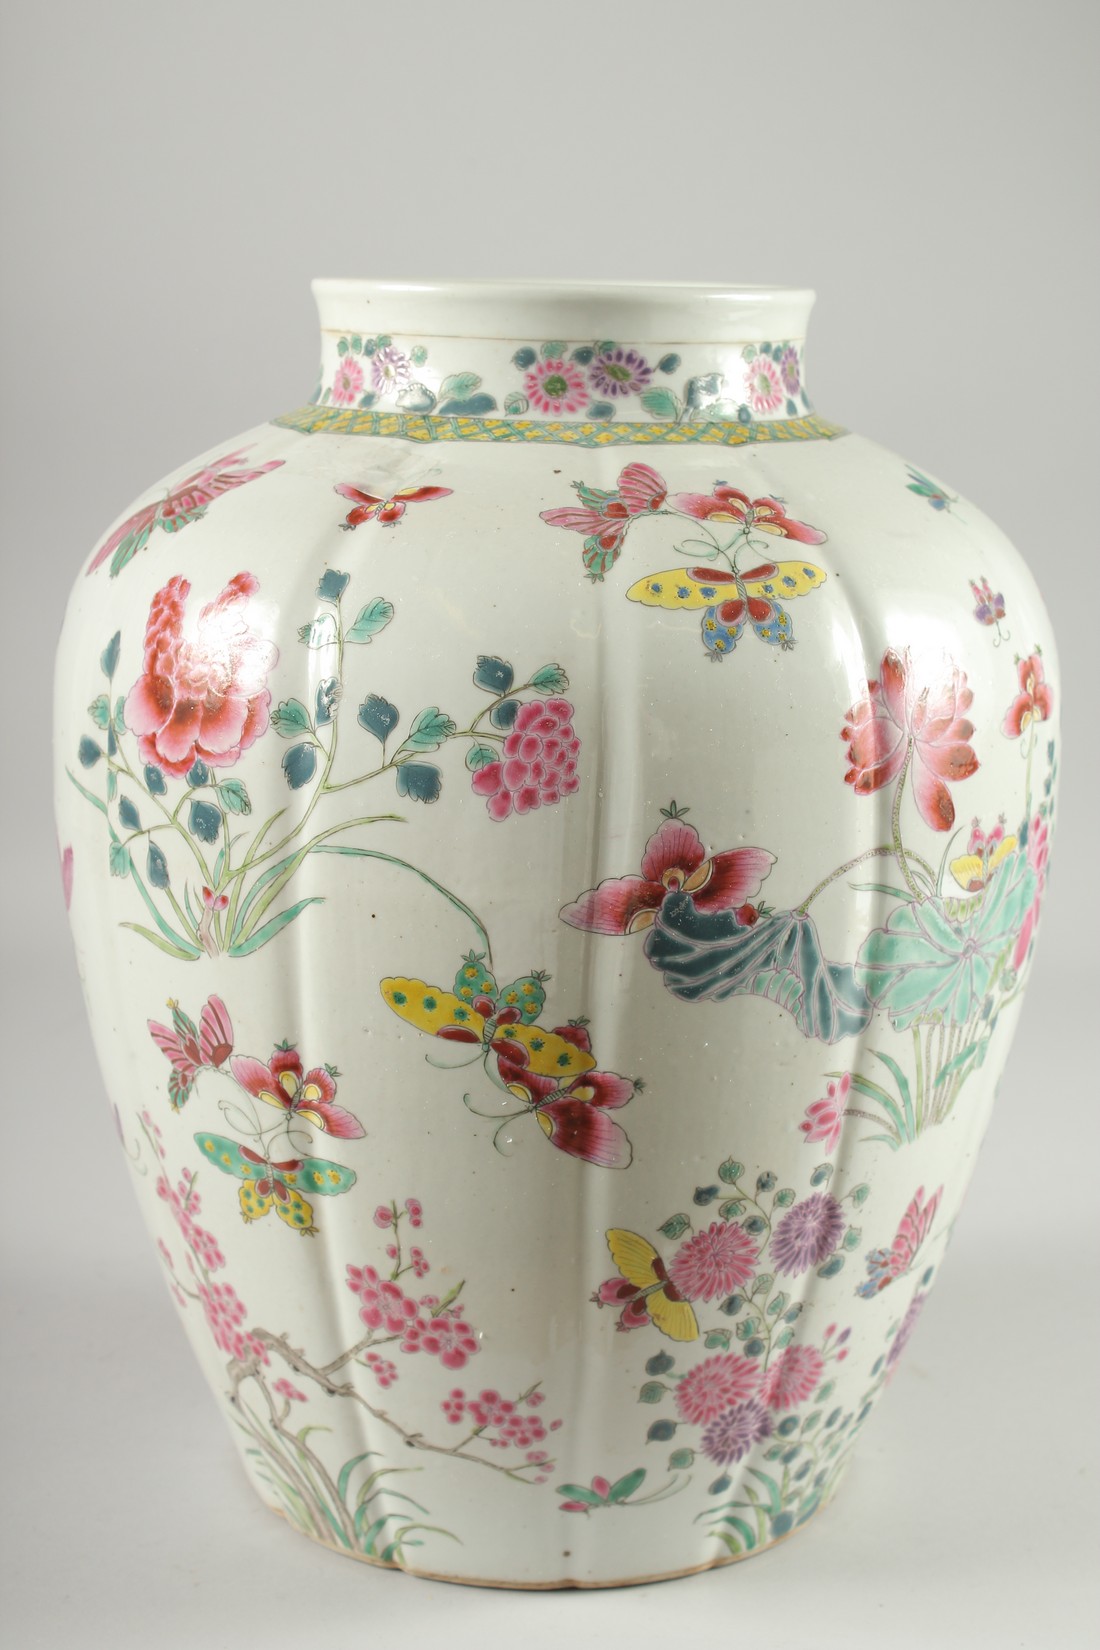 A LARGE CHINESE FAMILLE ROSE PORCELAIN VASE, painted with flora and butterflies, 34cm high. - Image 3 of 6